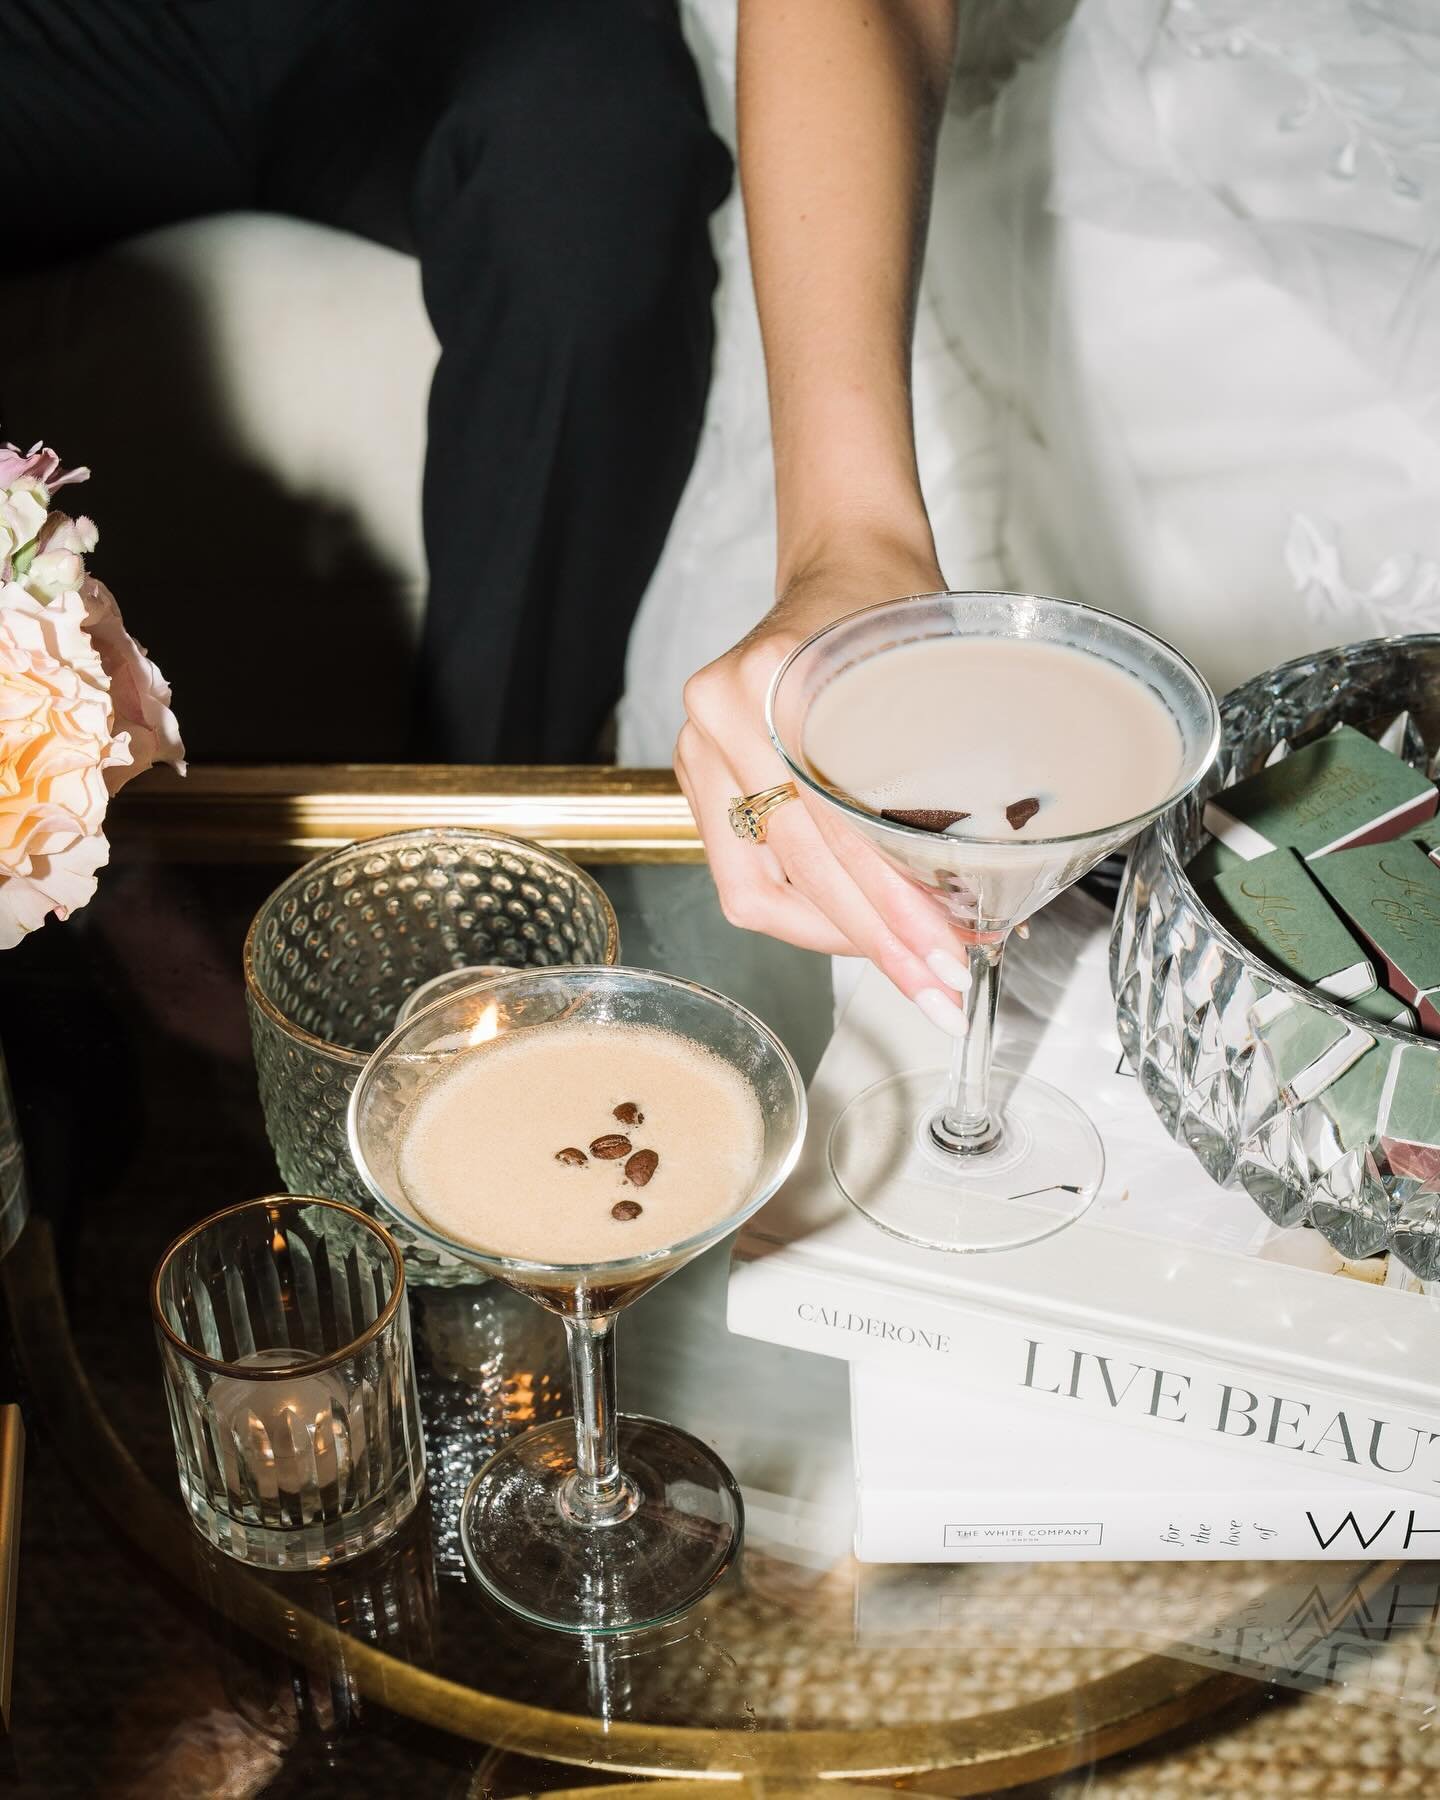 In lieu of a traditional wedding cake, Madison and Chris opted to pass espresso and chocolate martinis to their guests instead. We loved this fun late night addition! 

.
.
.
Photo: @aaronandjillian 
Floral: @stephaniegibbsevents 
Rentals: @whitebirc